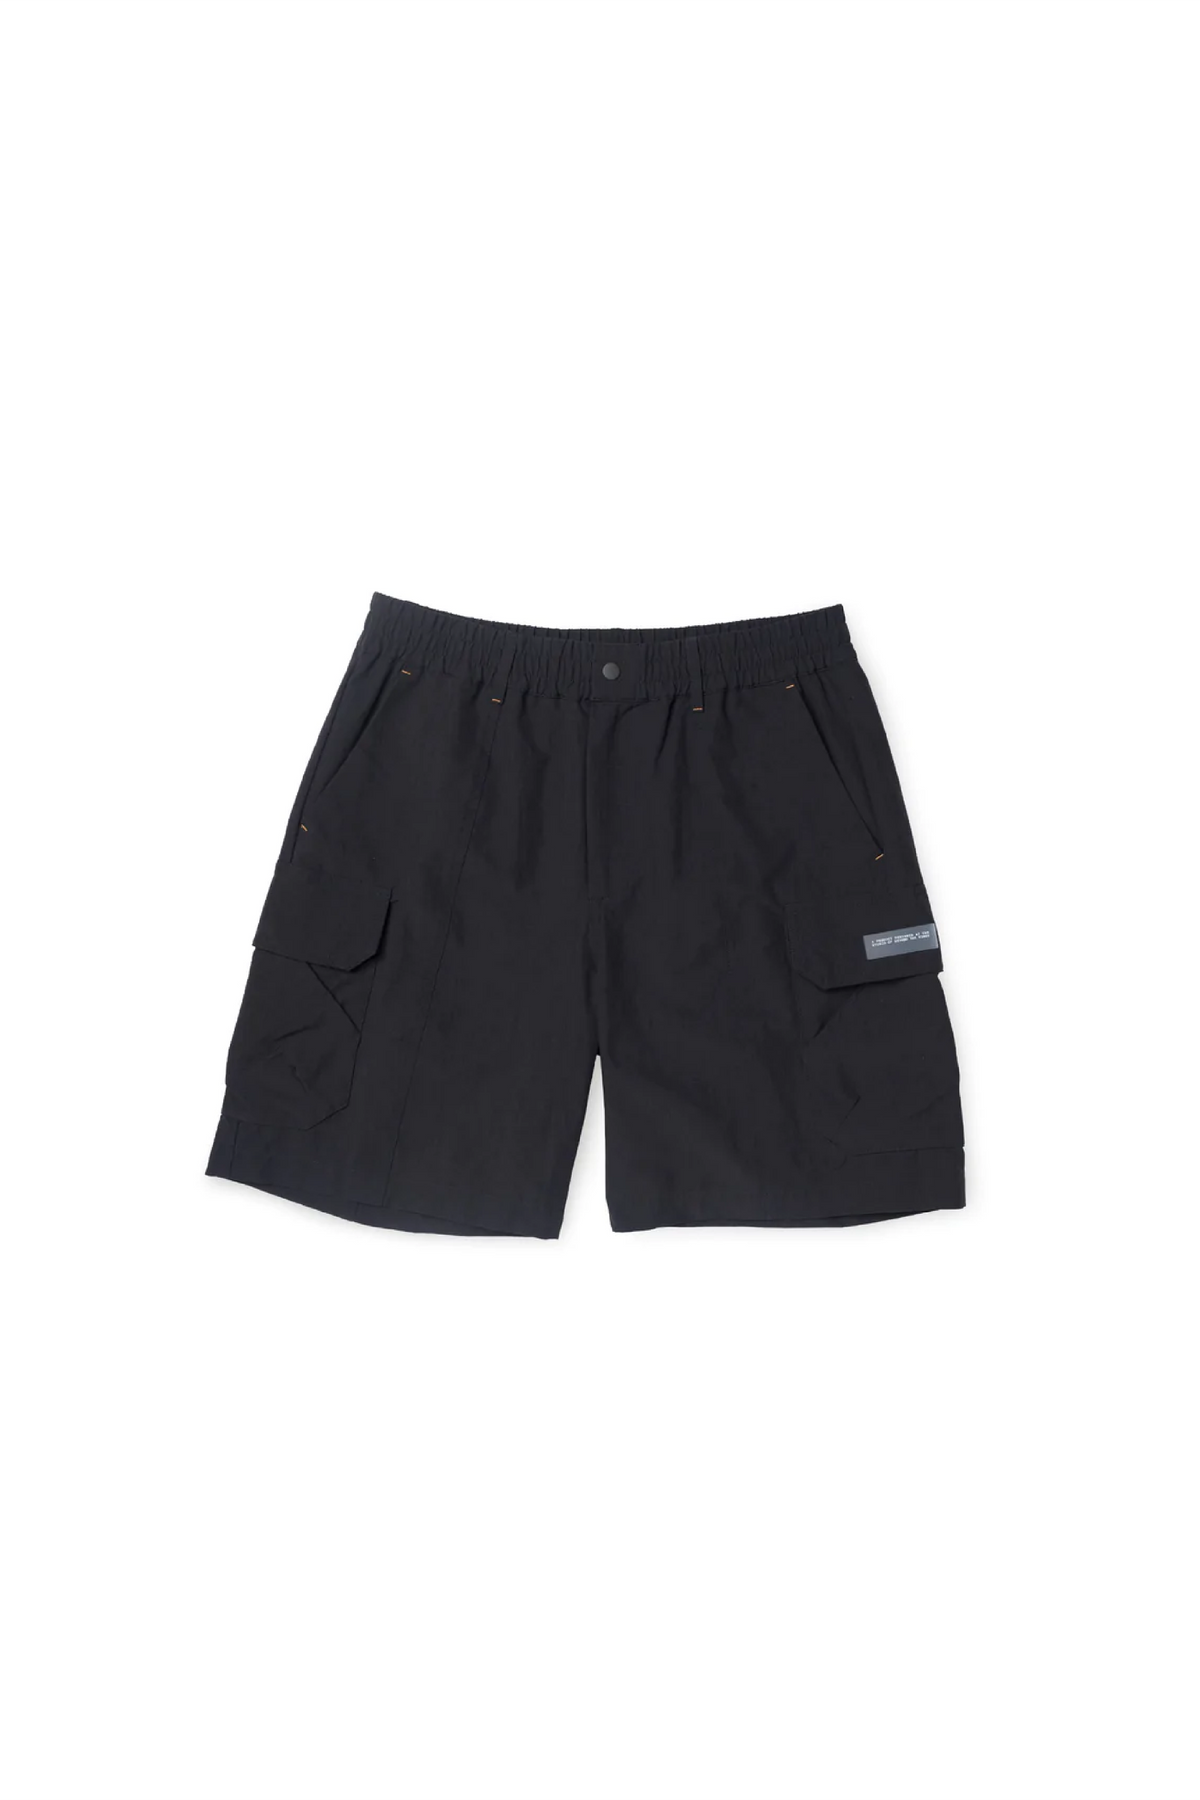 Utility Shorts | Beyond The Vines